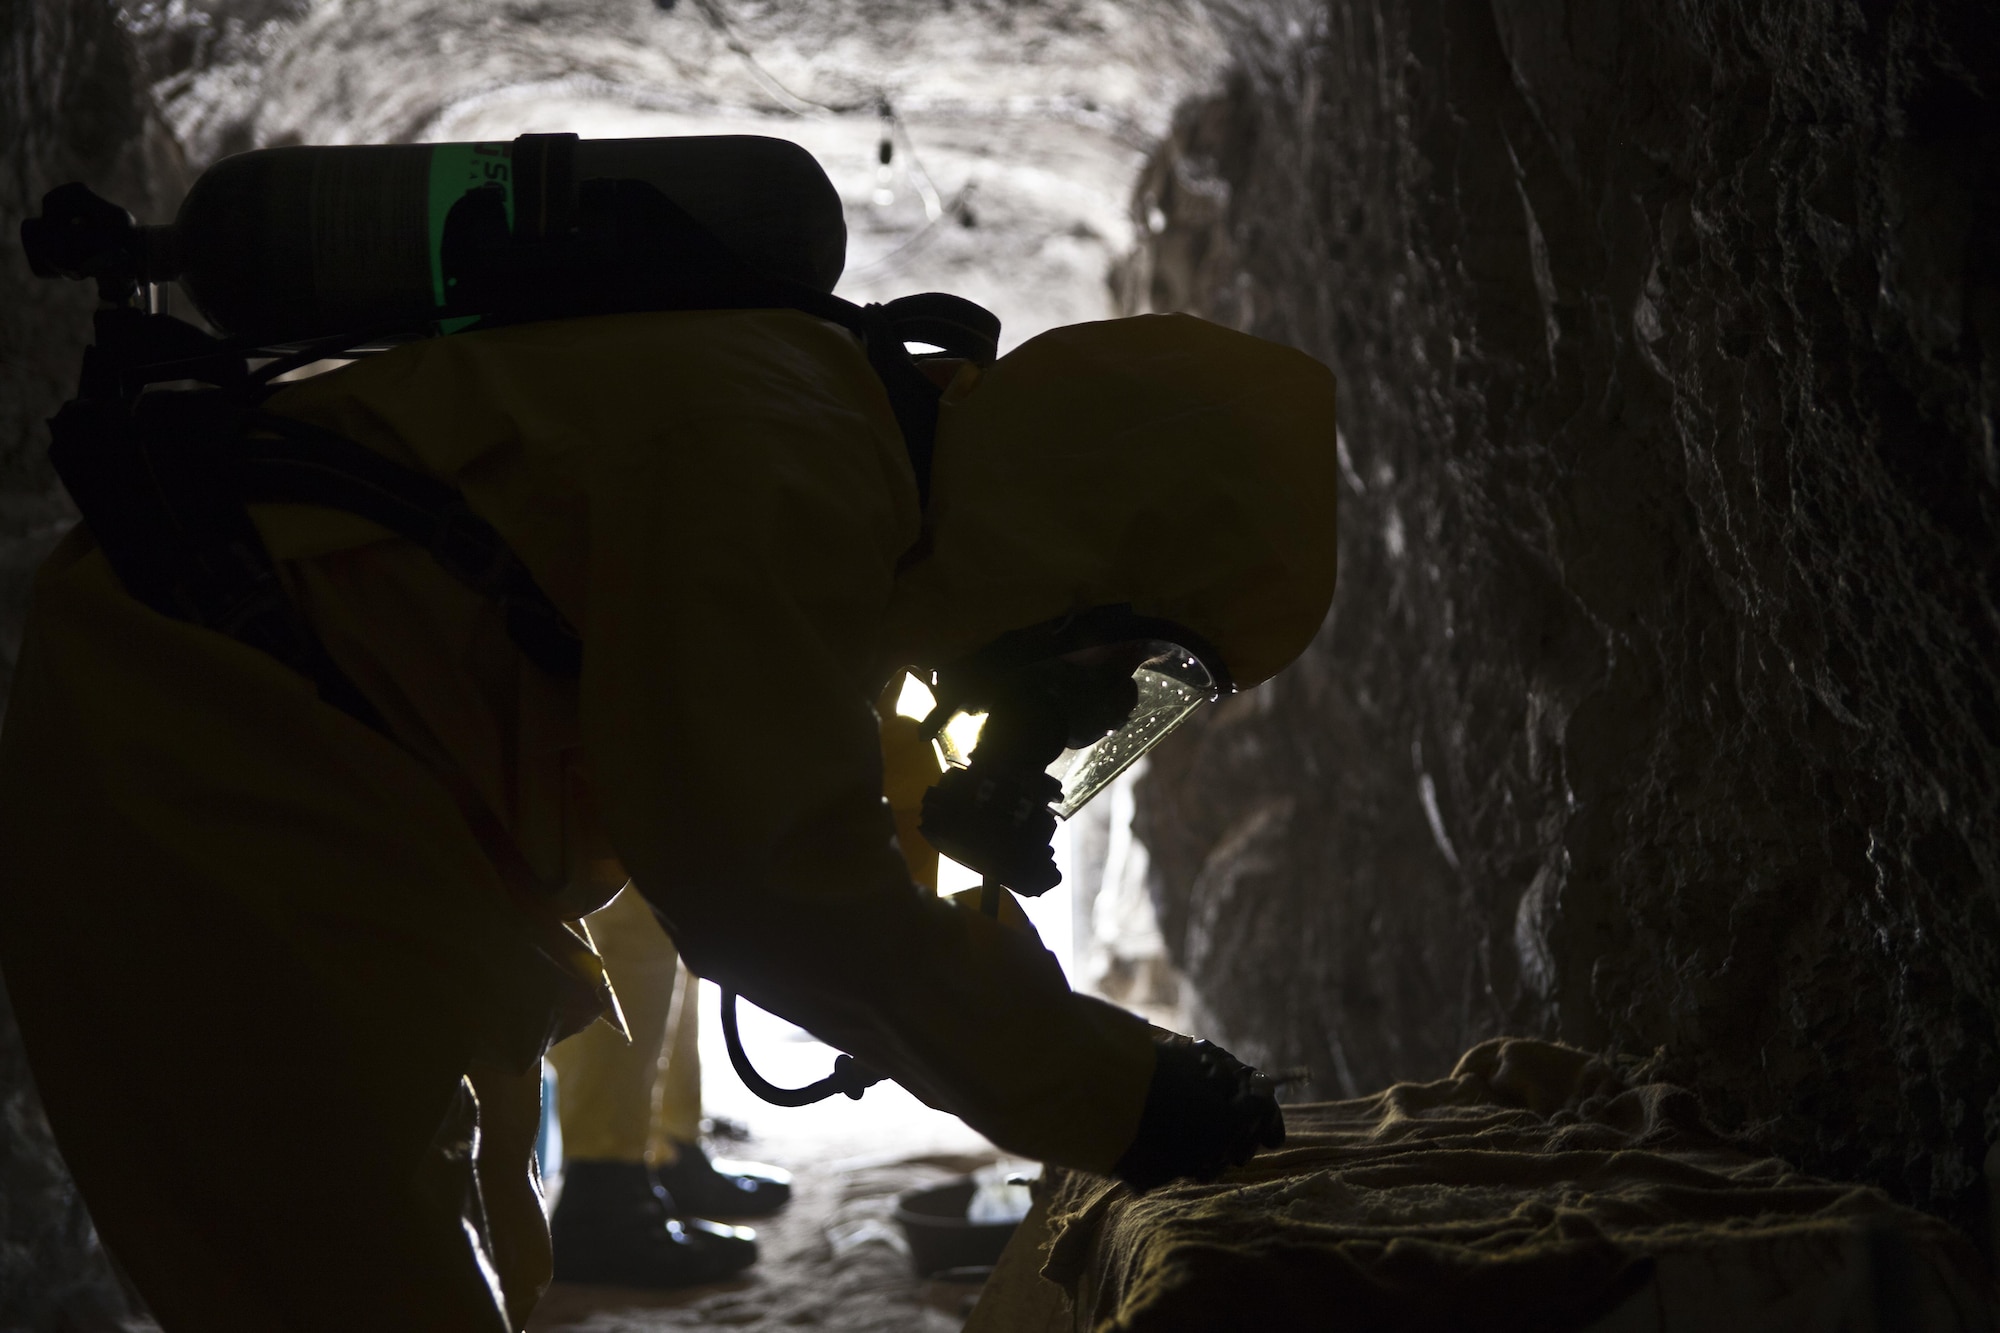 U.S. service members attending Naval School Explosive Ordnance Disposal (NAVSCOLEOD) conduct chemical biological handling of hazardous materials and decontamination during a simulated cave training exercise at Eglin Air Force Base, Fla., March 8, 2017. The purpose of NAVSCOLEOD is to train technicians in basic, as well as advanced, courses to perform various duties that include locating, identifying, rendering safe, and disposing of bombs and other hazardous materials. (U.S. Marine Corps photo by Cpl. Laura Mercado)